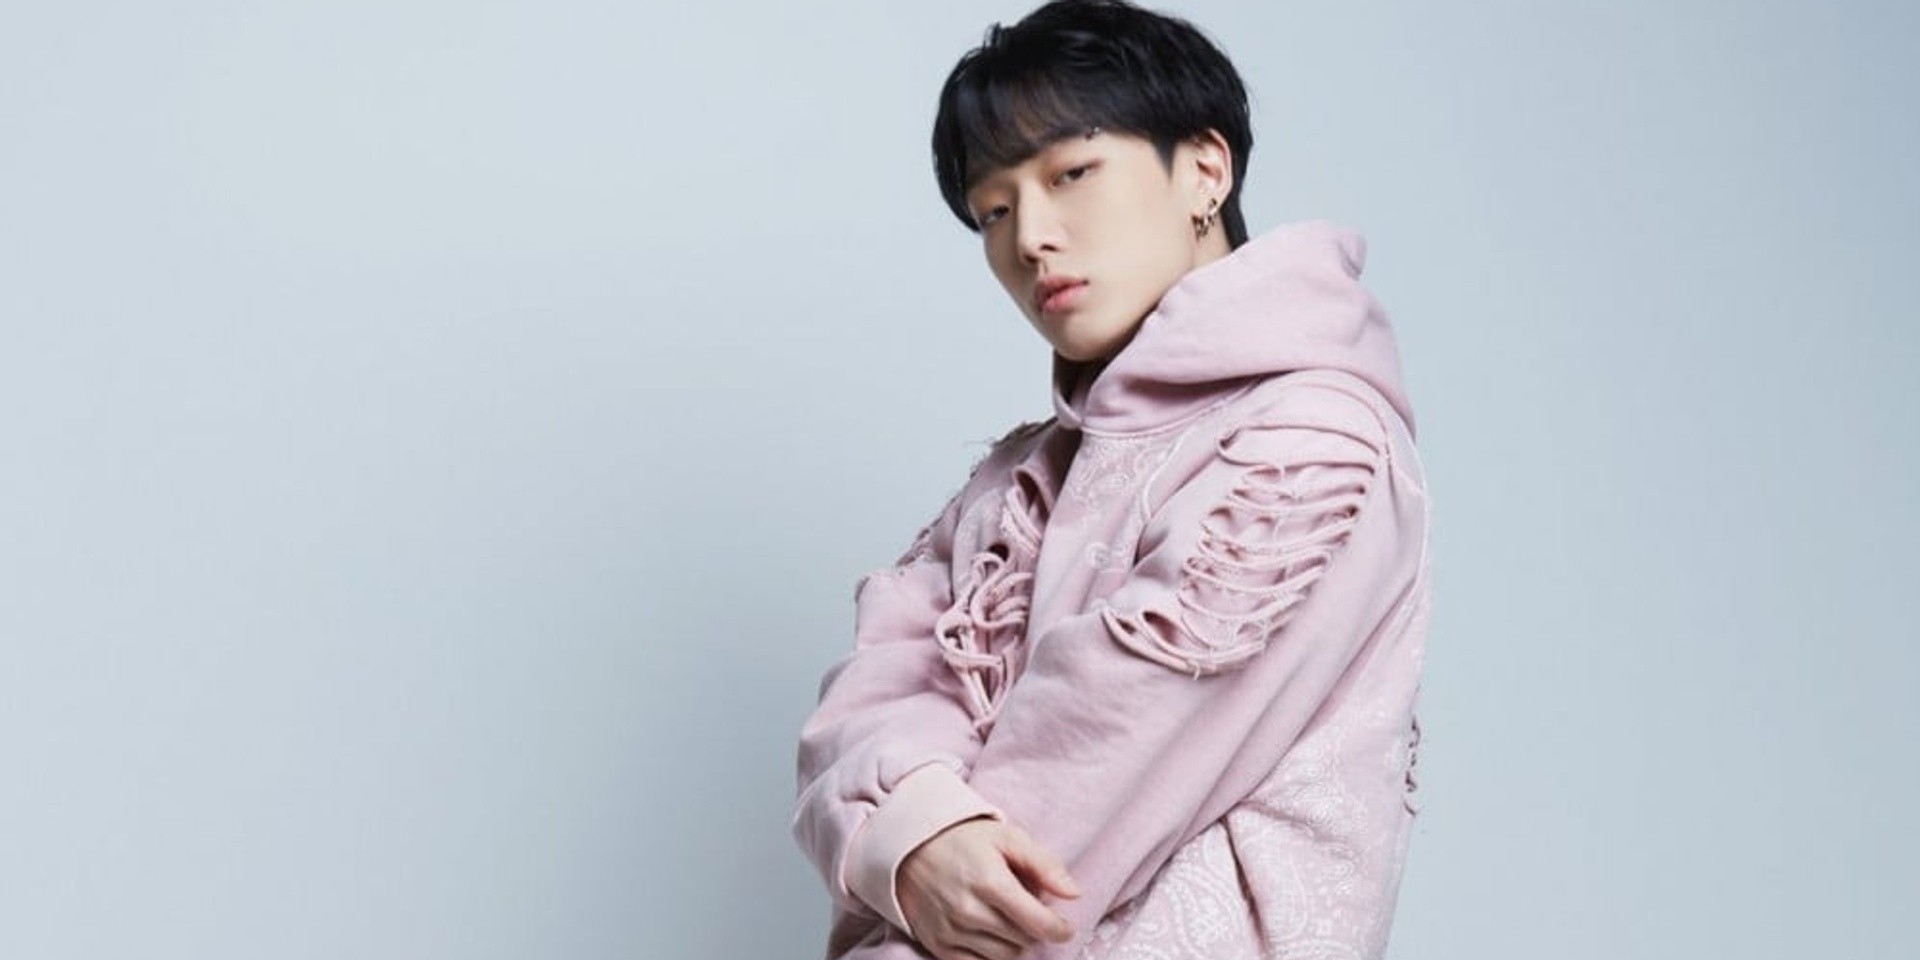 iKON's BOBBY to release new solo single this March